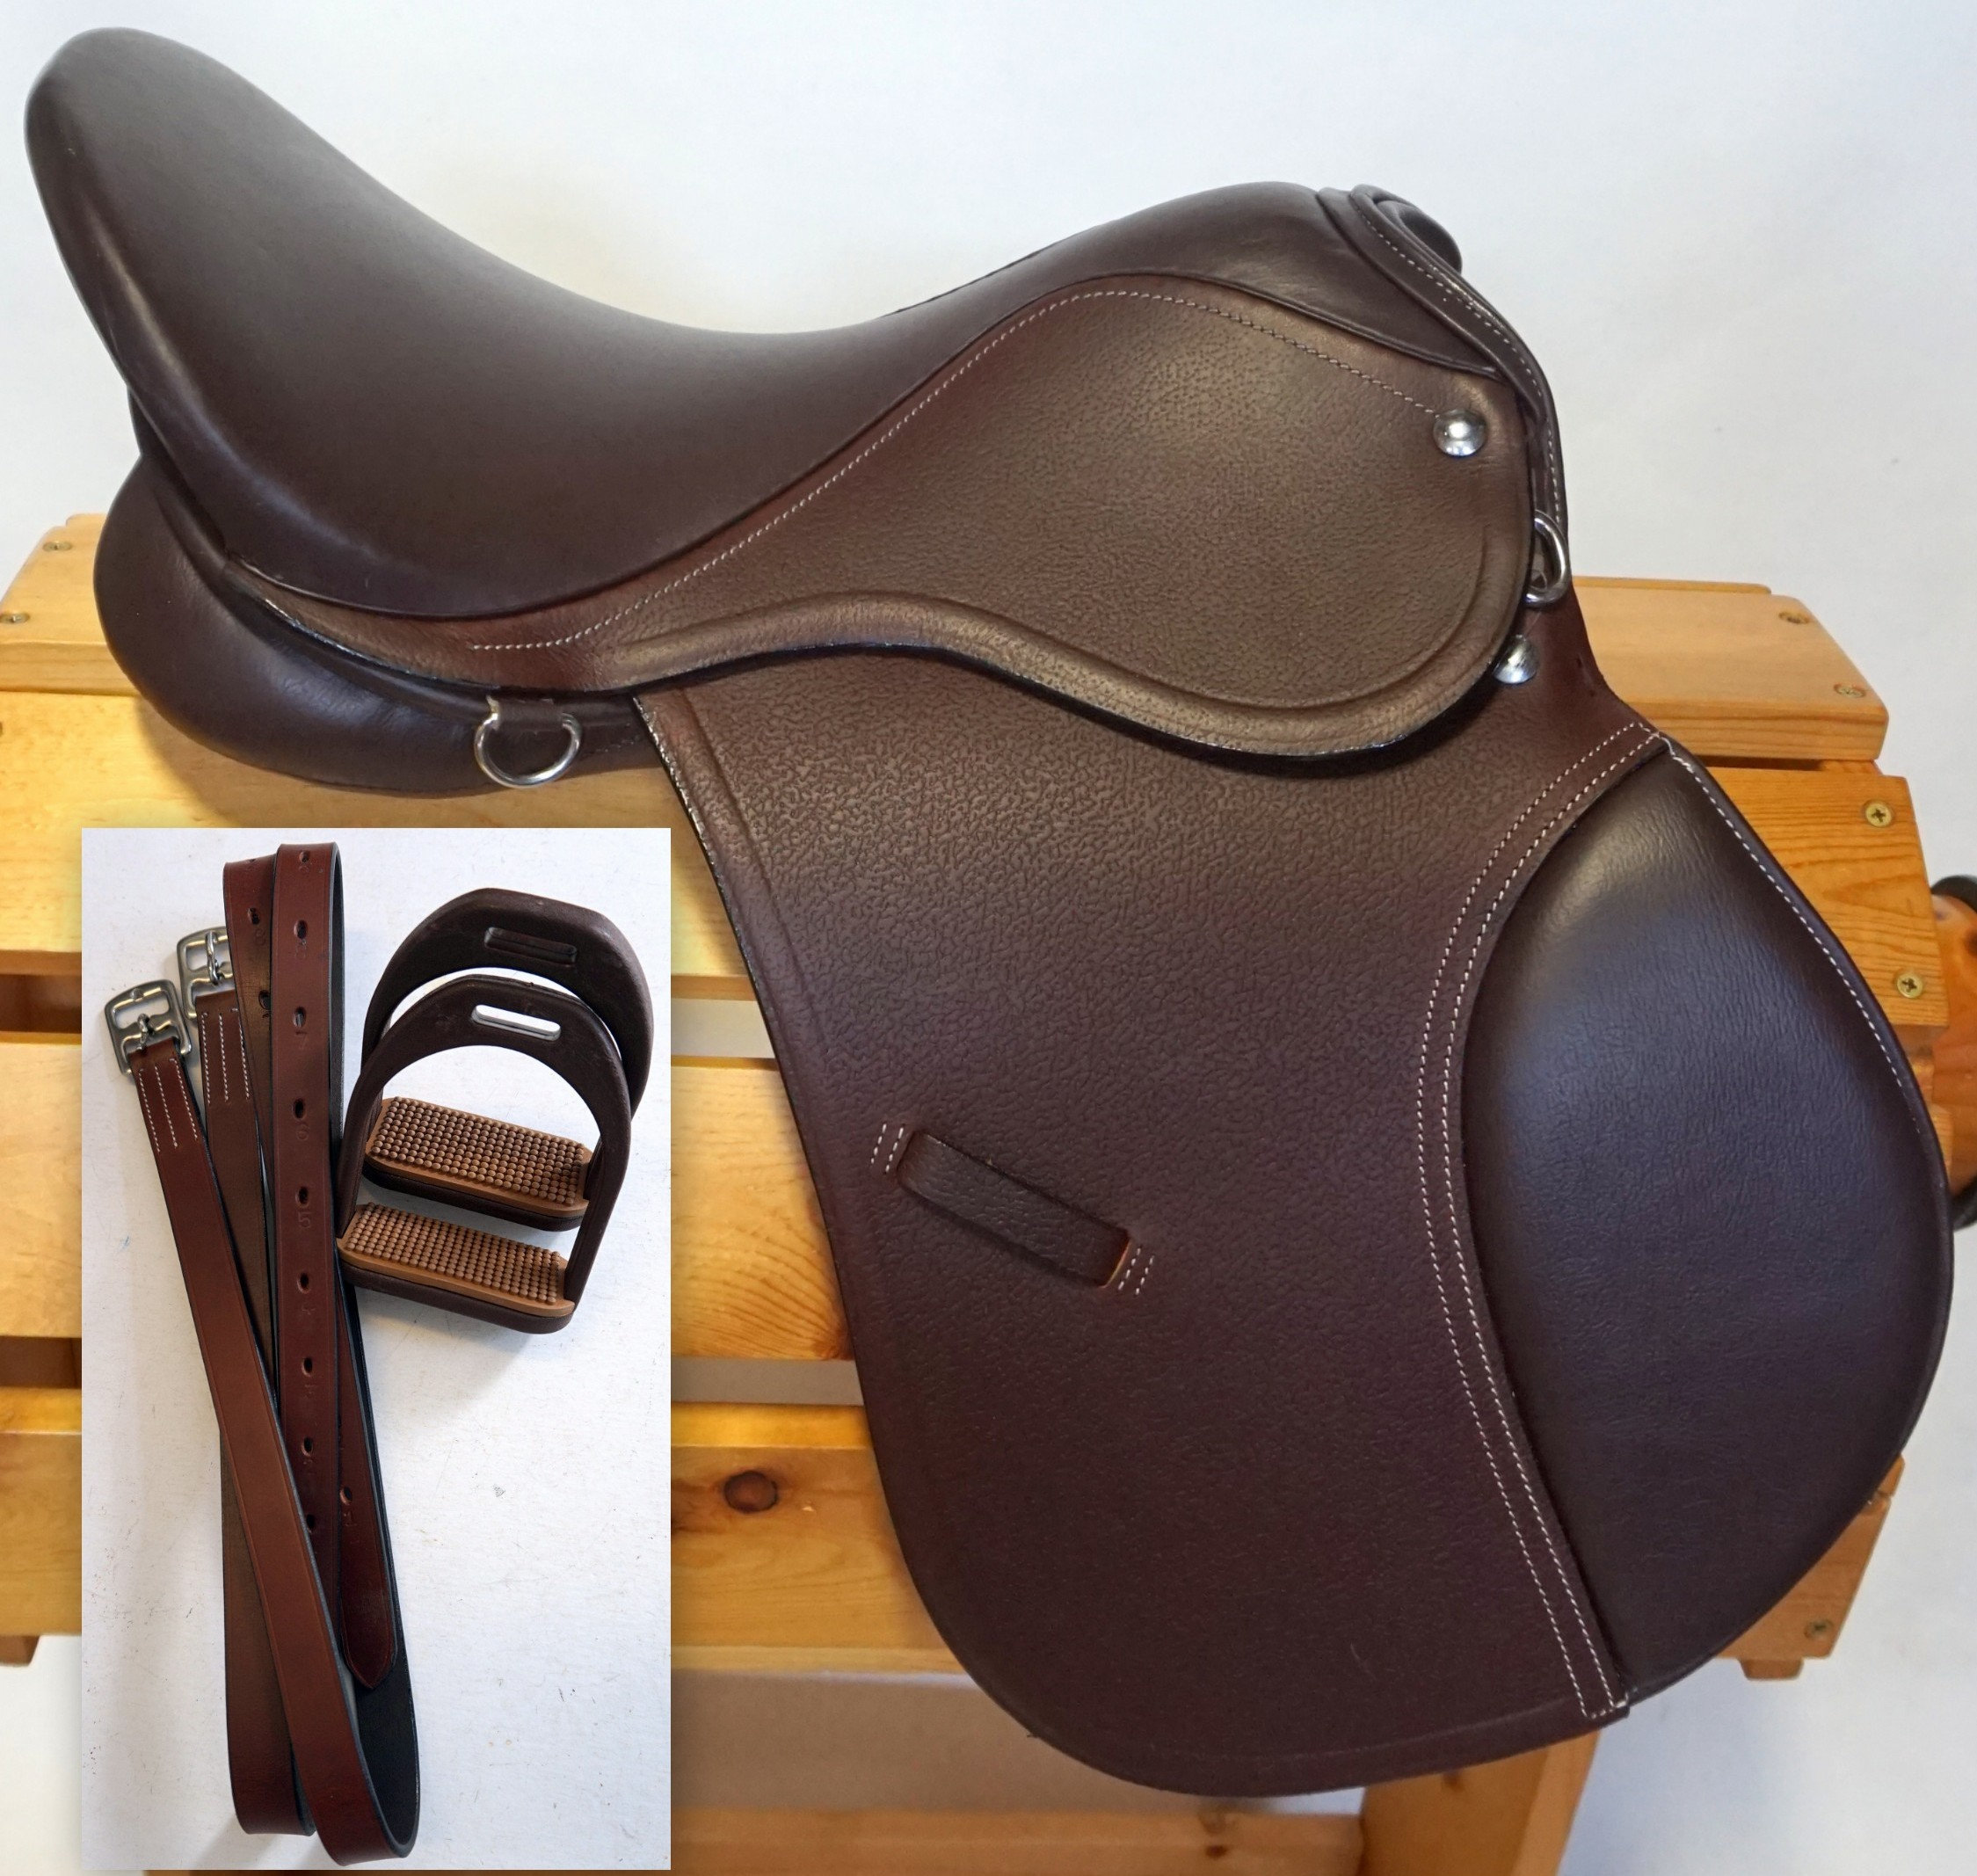 WIDE TREE All Purpose-14" 15" Lead line 4H Training Brown English-Saddle Only Or 48" Leathers + 4.5" Irons 3 pc pkg OR Plus bridle -4 Pc Pkg